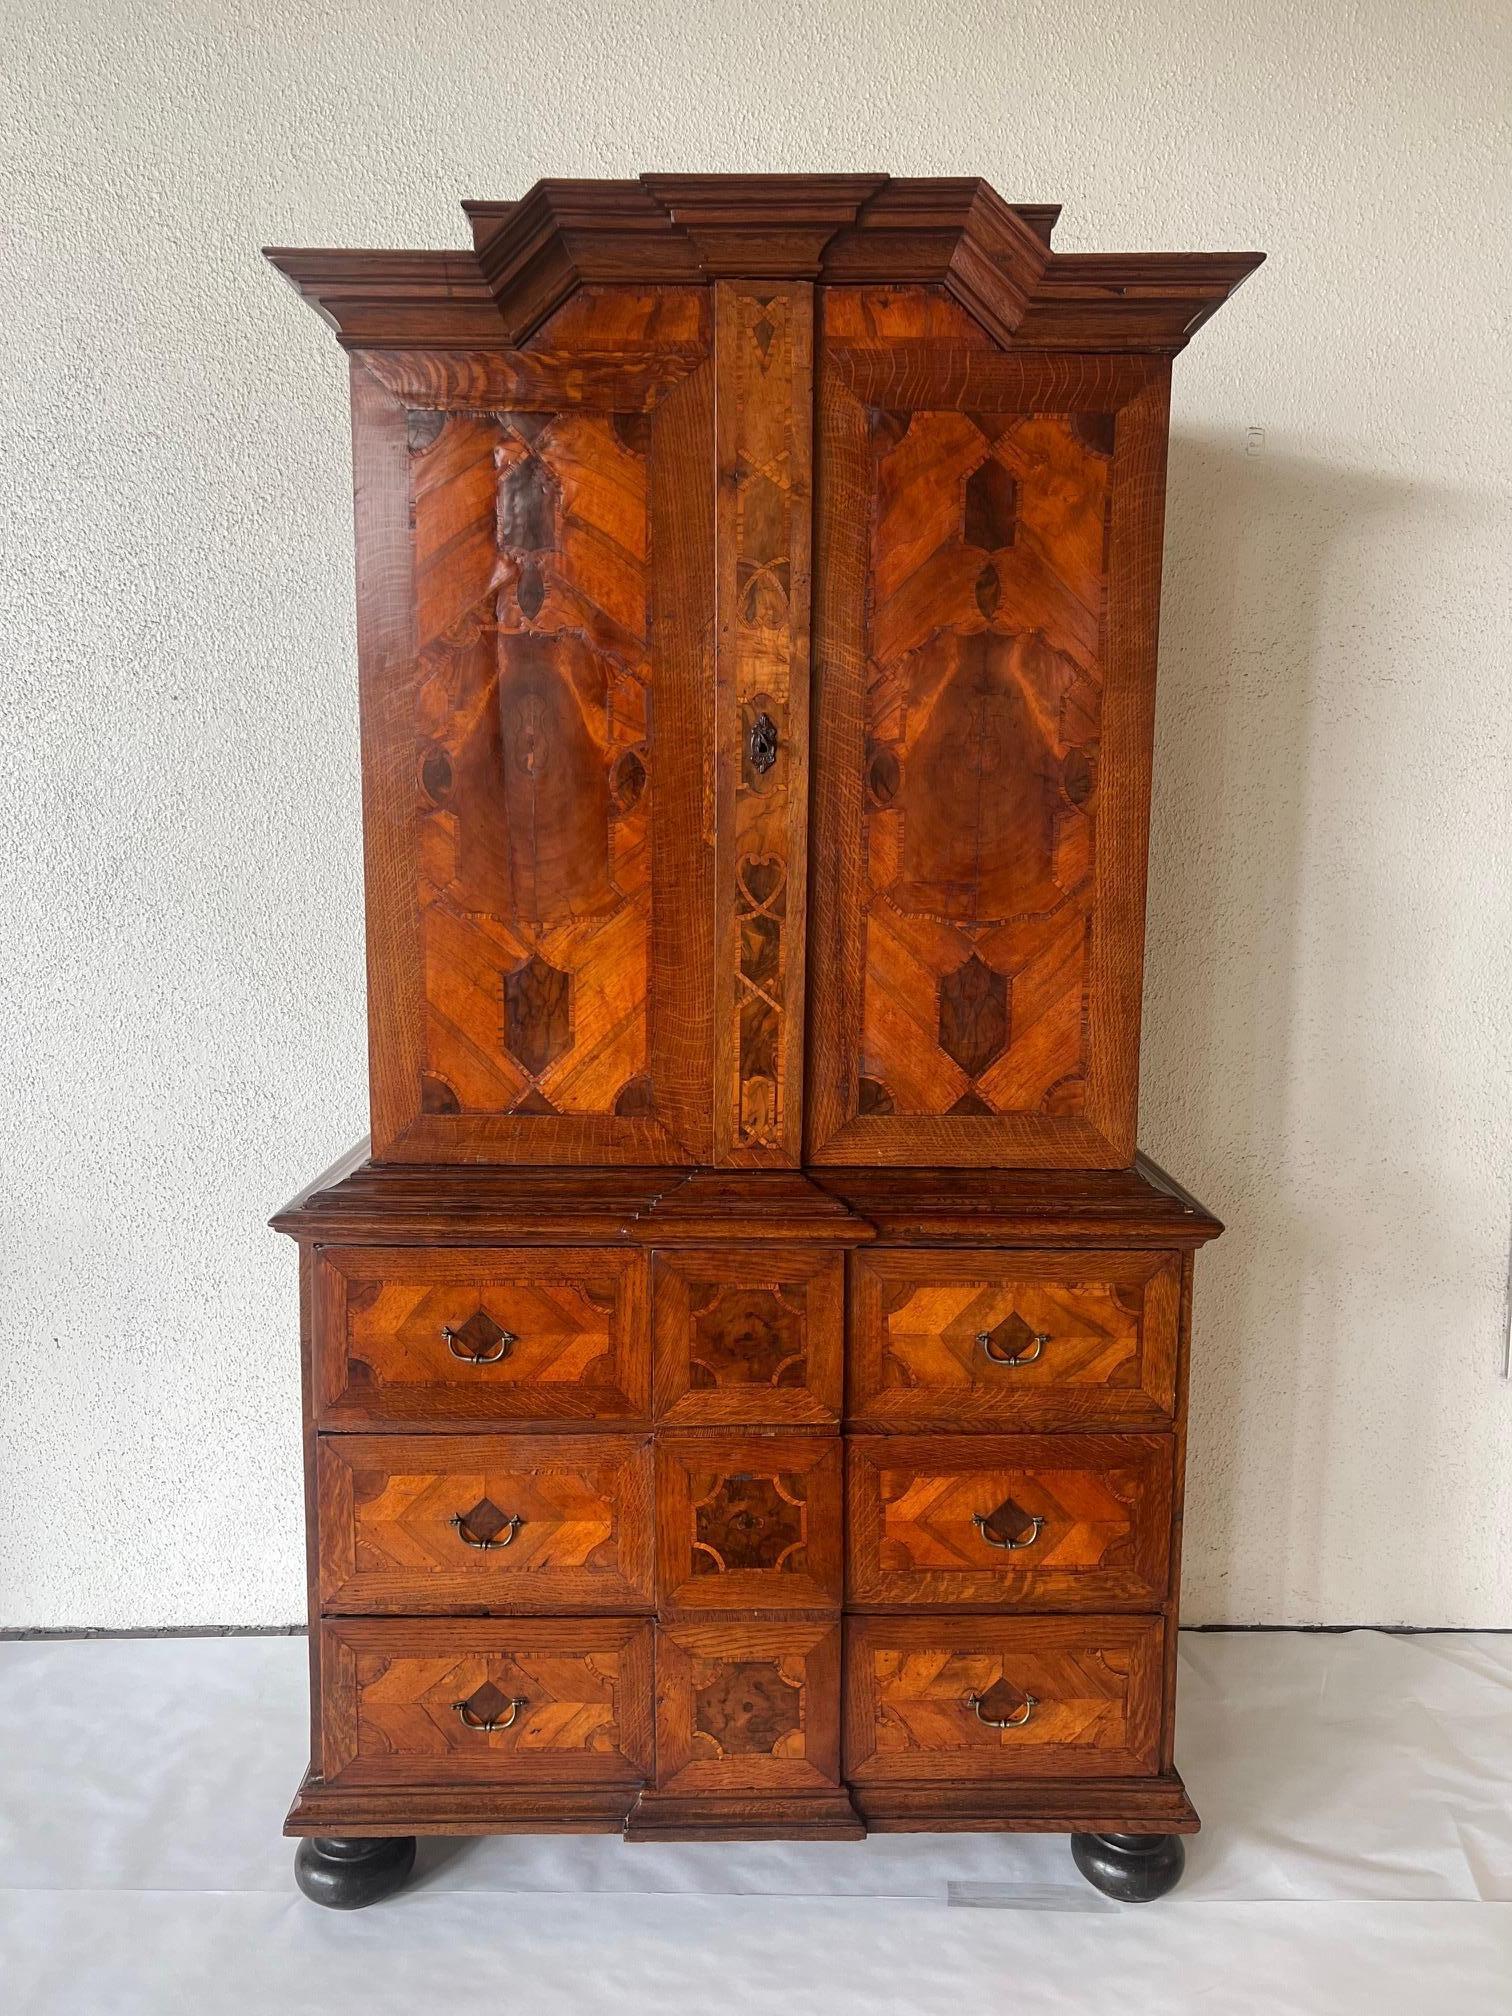 Dutch Colonial Antique Dutch Cabinet Crafted from Walnut and Mahogany  For Sale